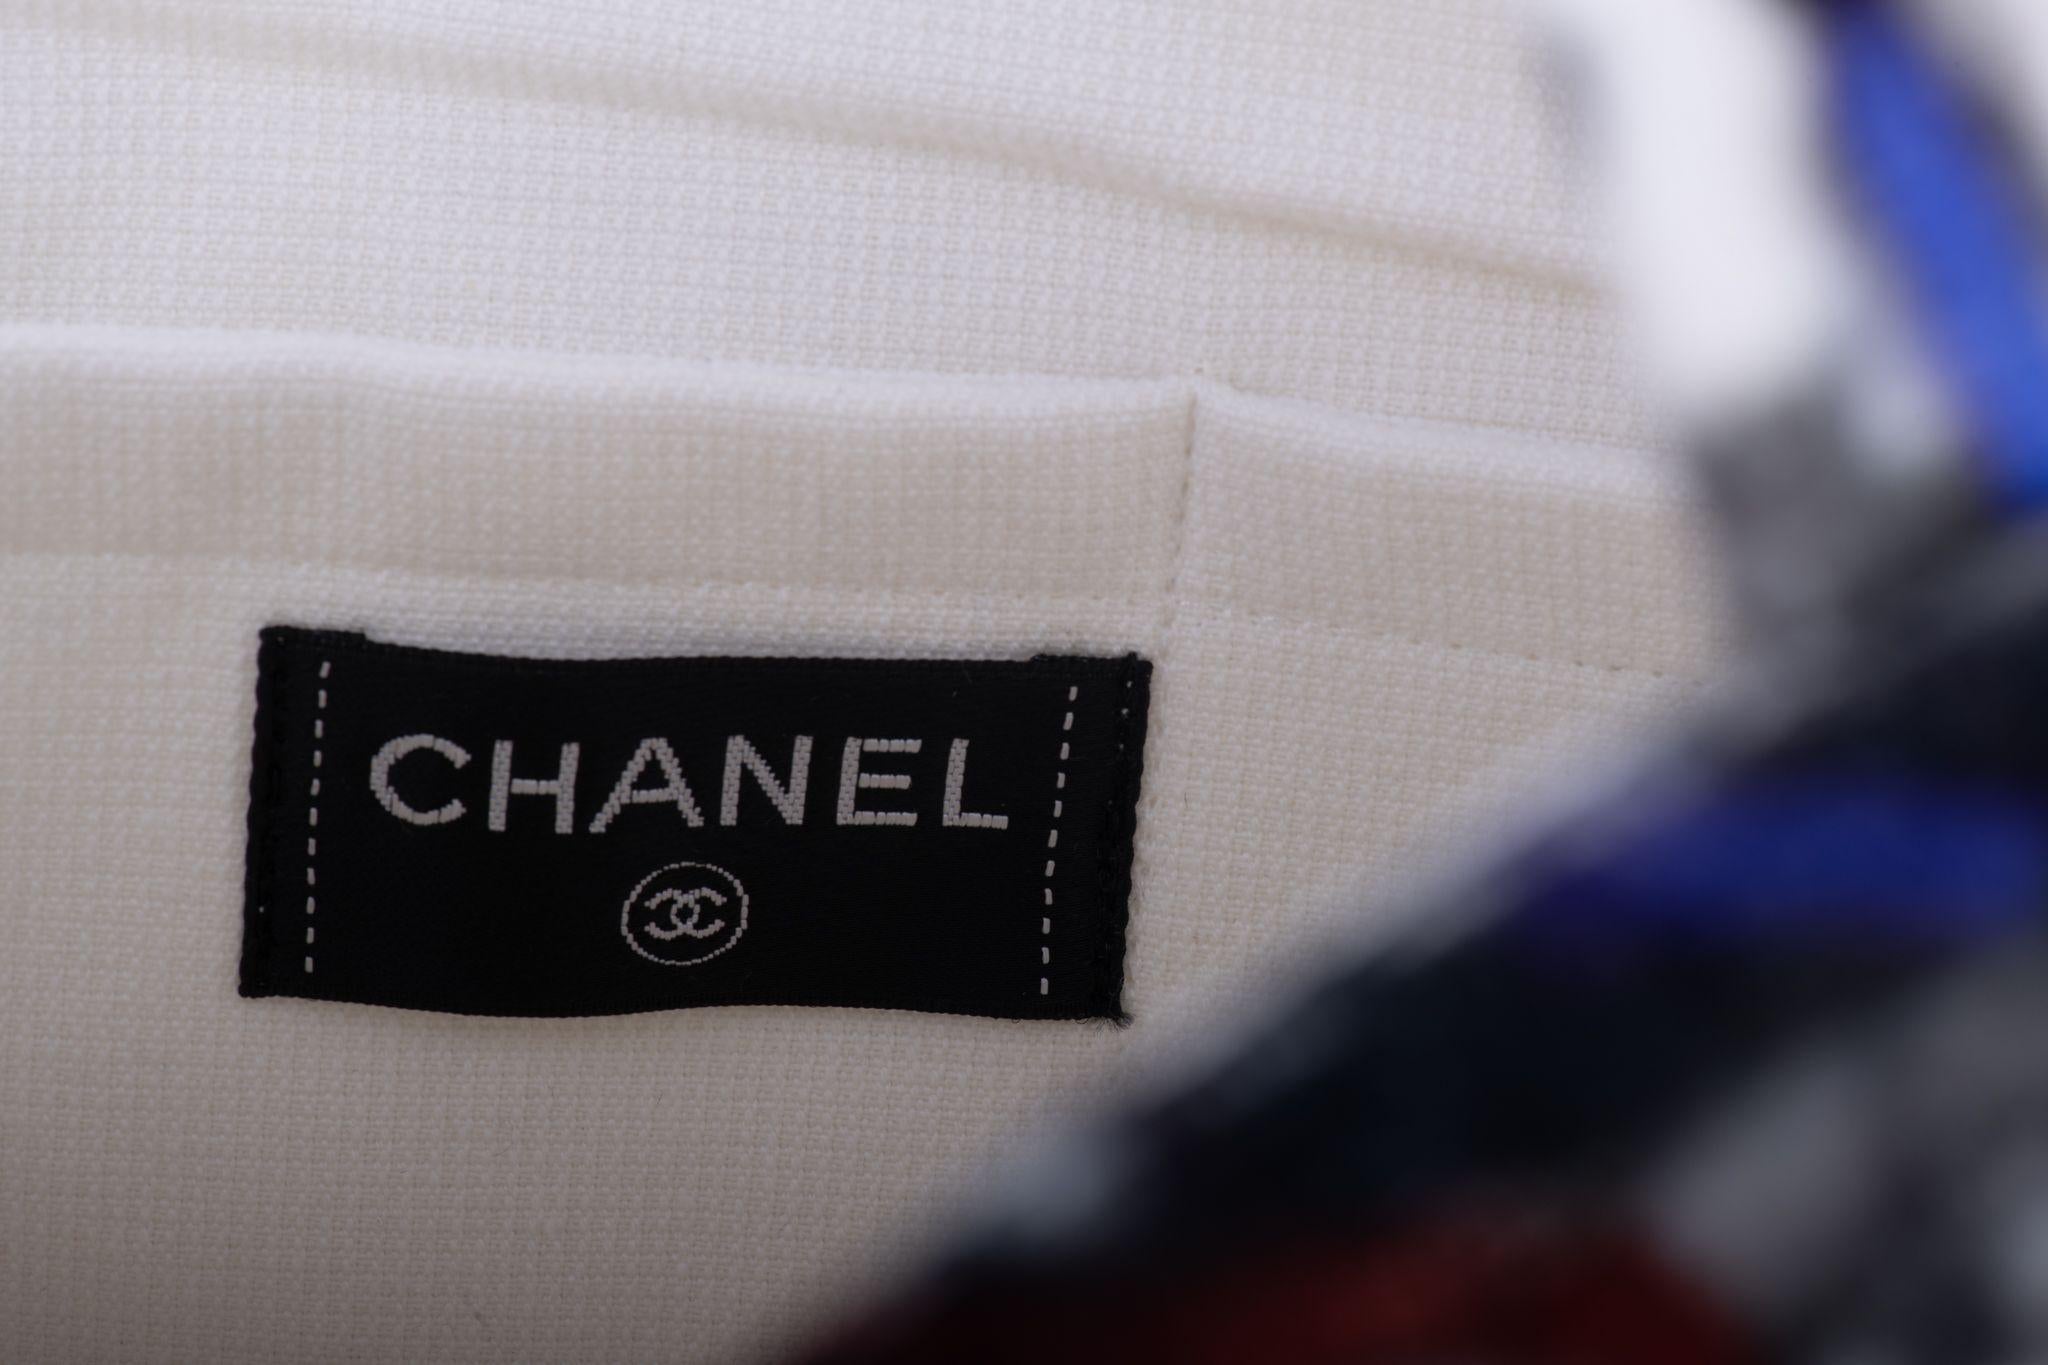 Chanel New Black/White Terry Cloth Bag Neuf - En vente à West Hollywood, CA